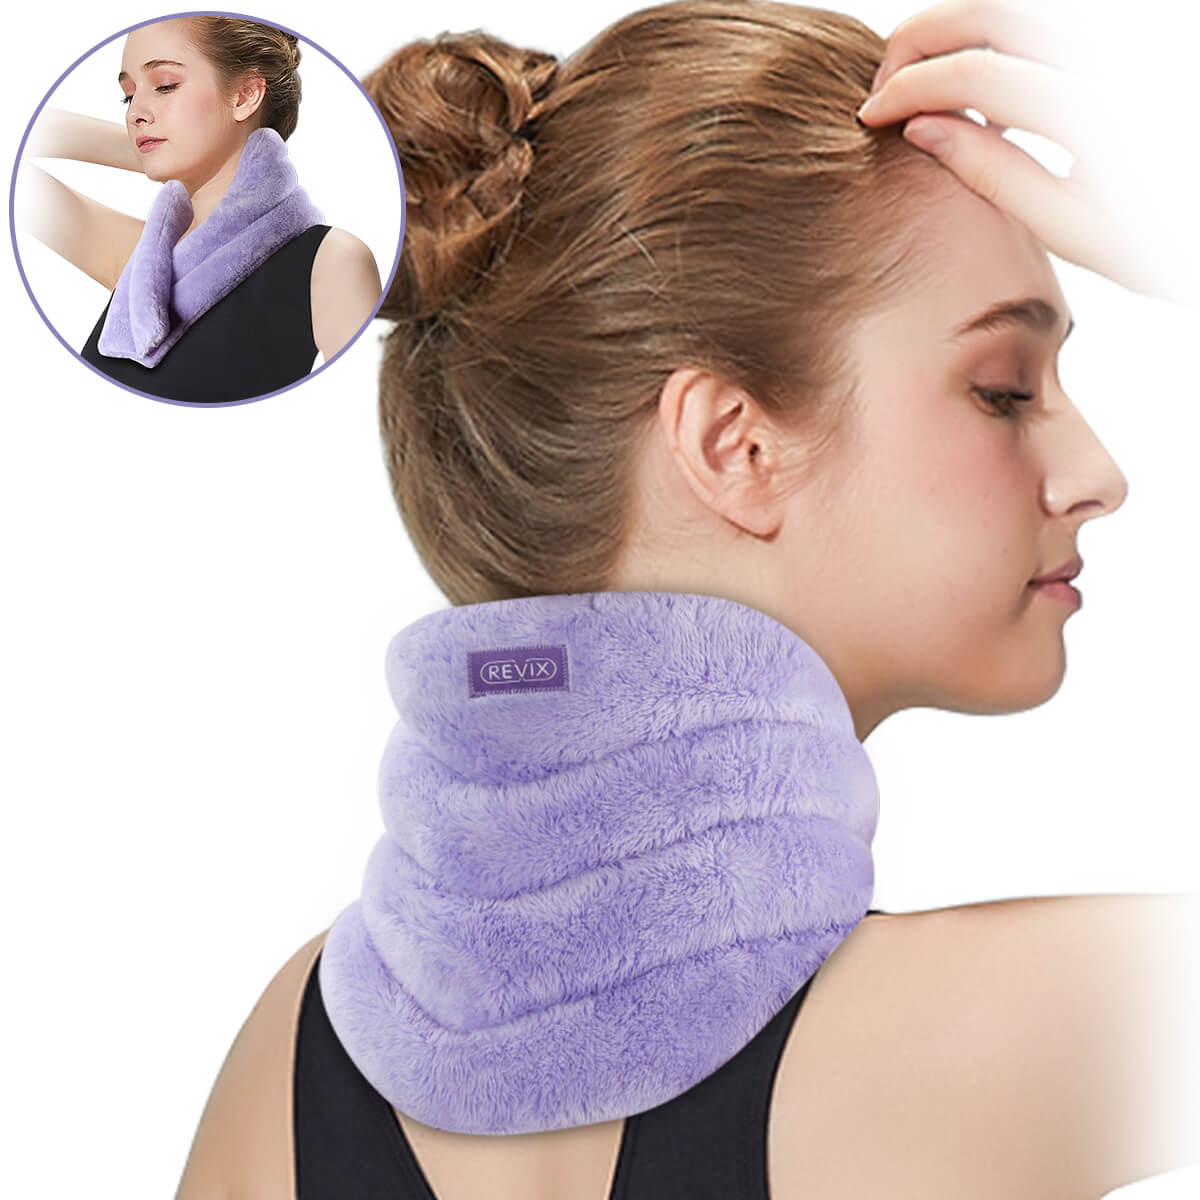 REVIX Heated Neck Wrap Microwave Heating Pad for Neck and Shoulders Pain Relief, Weighted Neck Warmer Microwavable with Miost Heat, Unscented